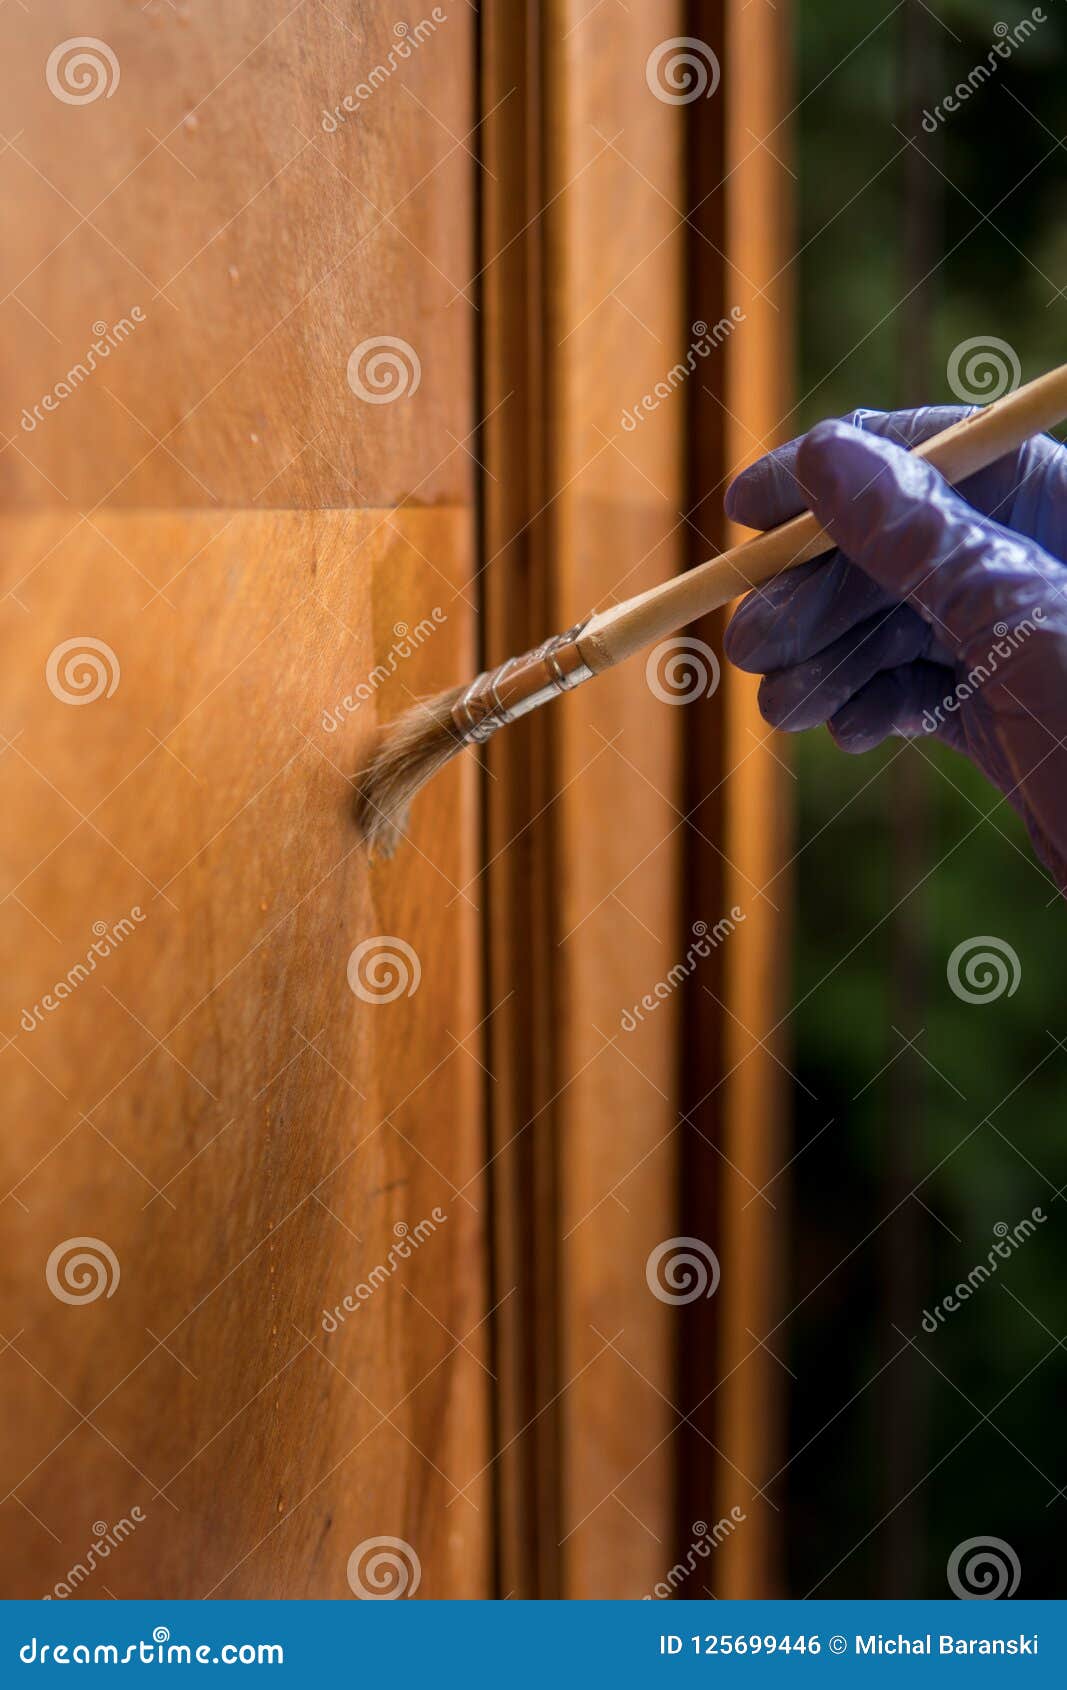 Removing Wax From Old Furniture Stock Photo Image Of Surface